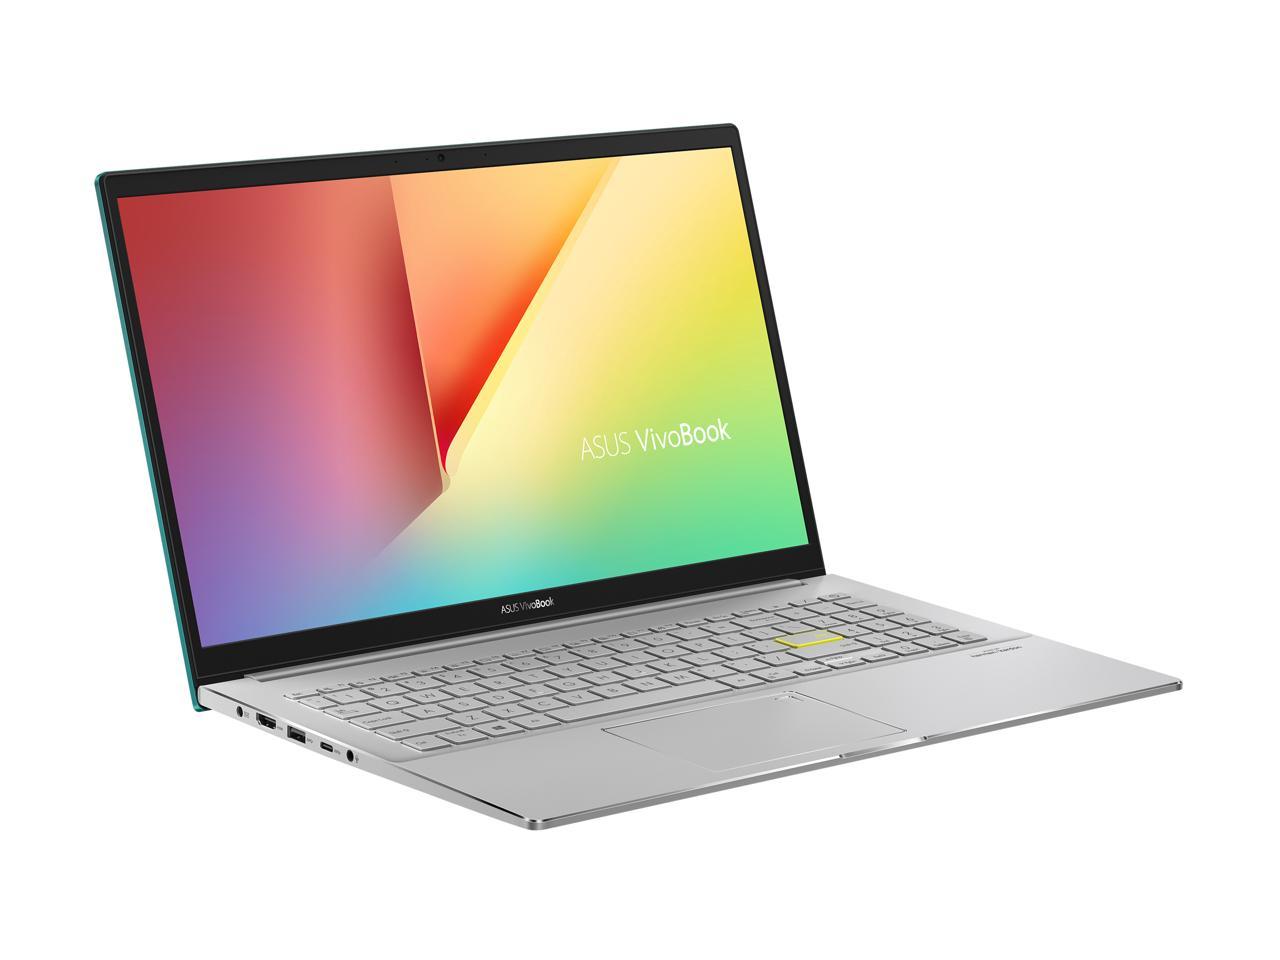 ASUS VivoBook S15 S533 Thin and Light Laptop, 15.6" FHD Display, Intel Core i5-1135G7 Processor, 8 GB DDR4 RAM, 512 GB PCIe SSD, Wi-Fi 6, Windows 10 Home, Gaia Green, S533EA-DH51-GN